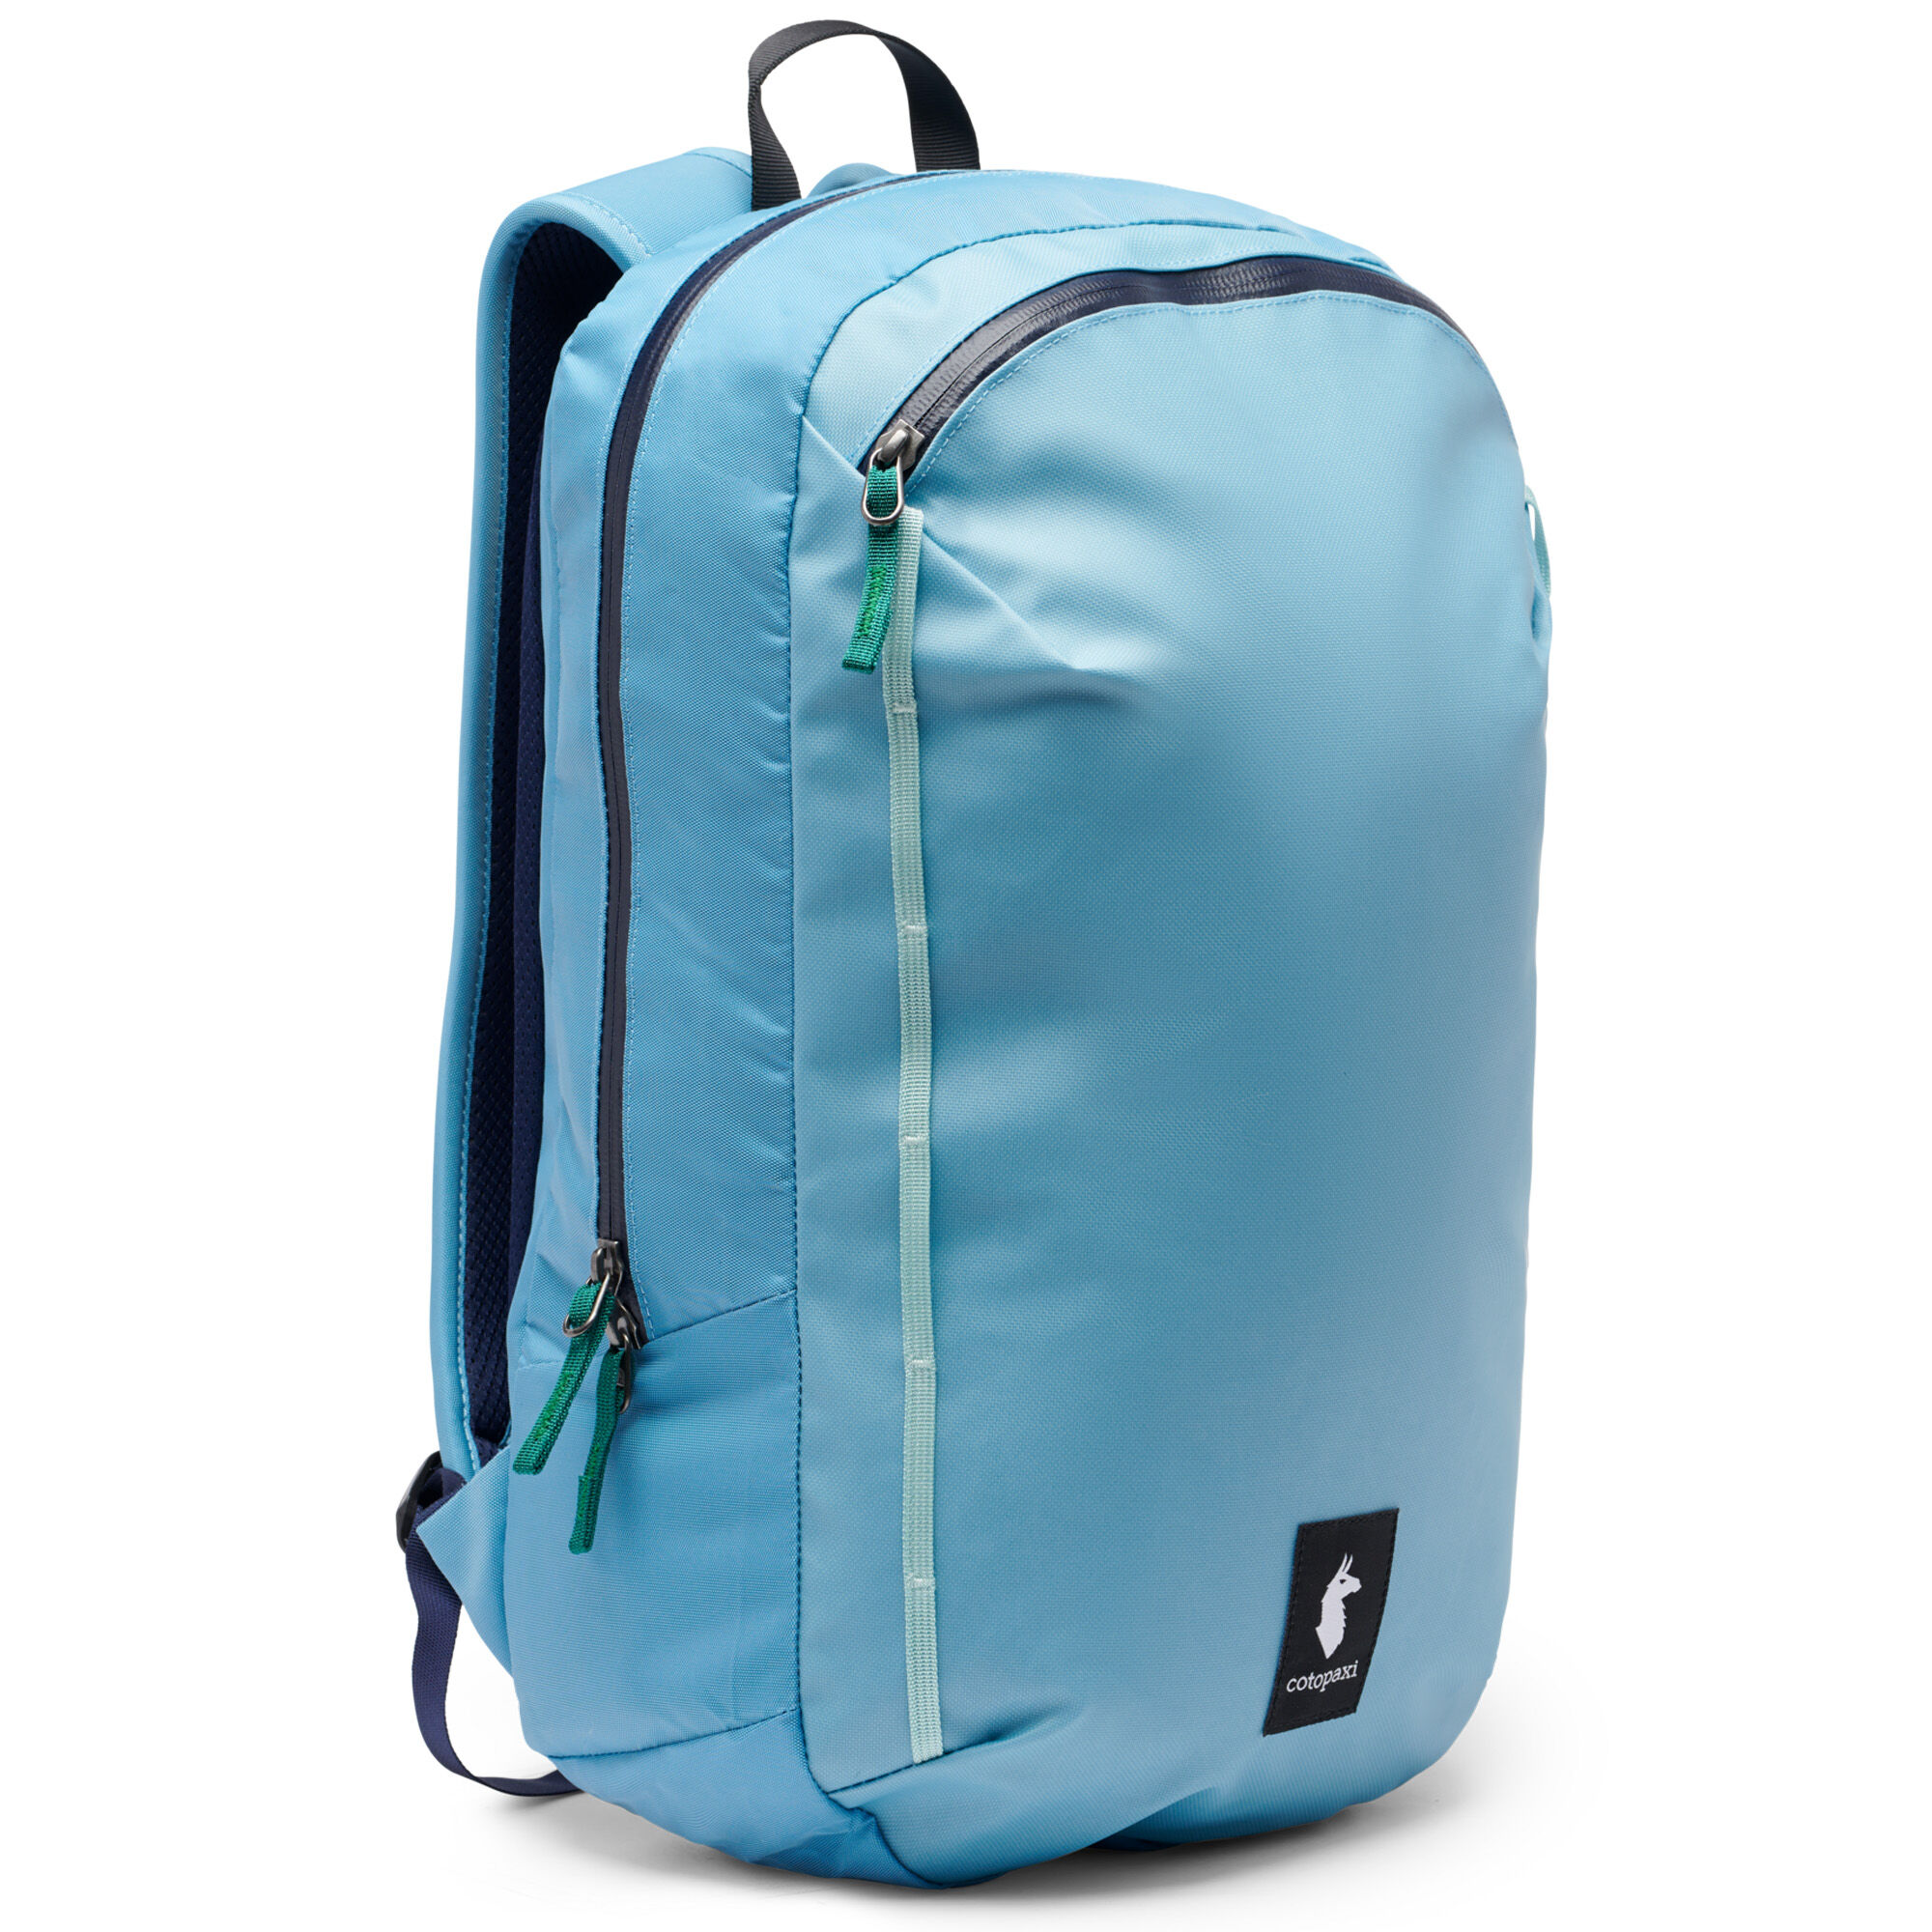 ussportsdiscount.com is your source for cotopaxi in stock Vaya 18L ...